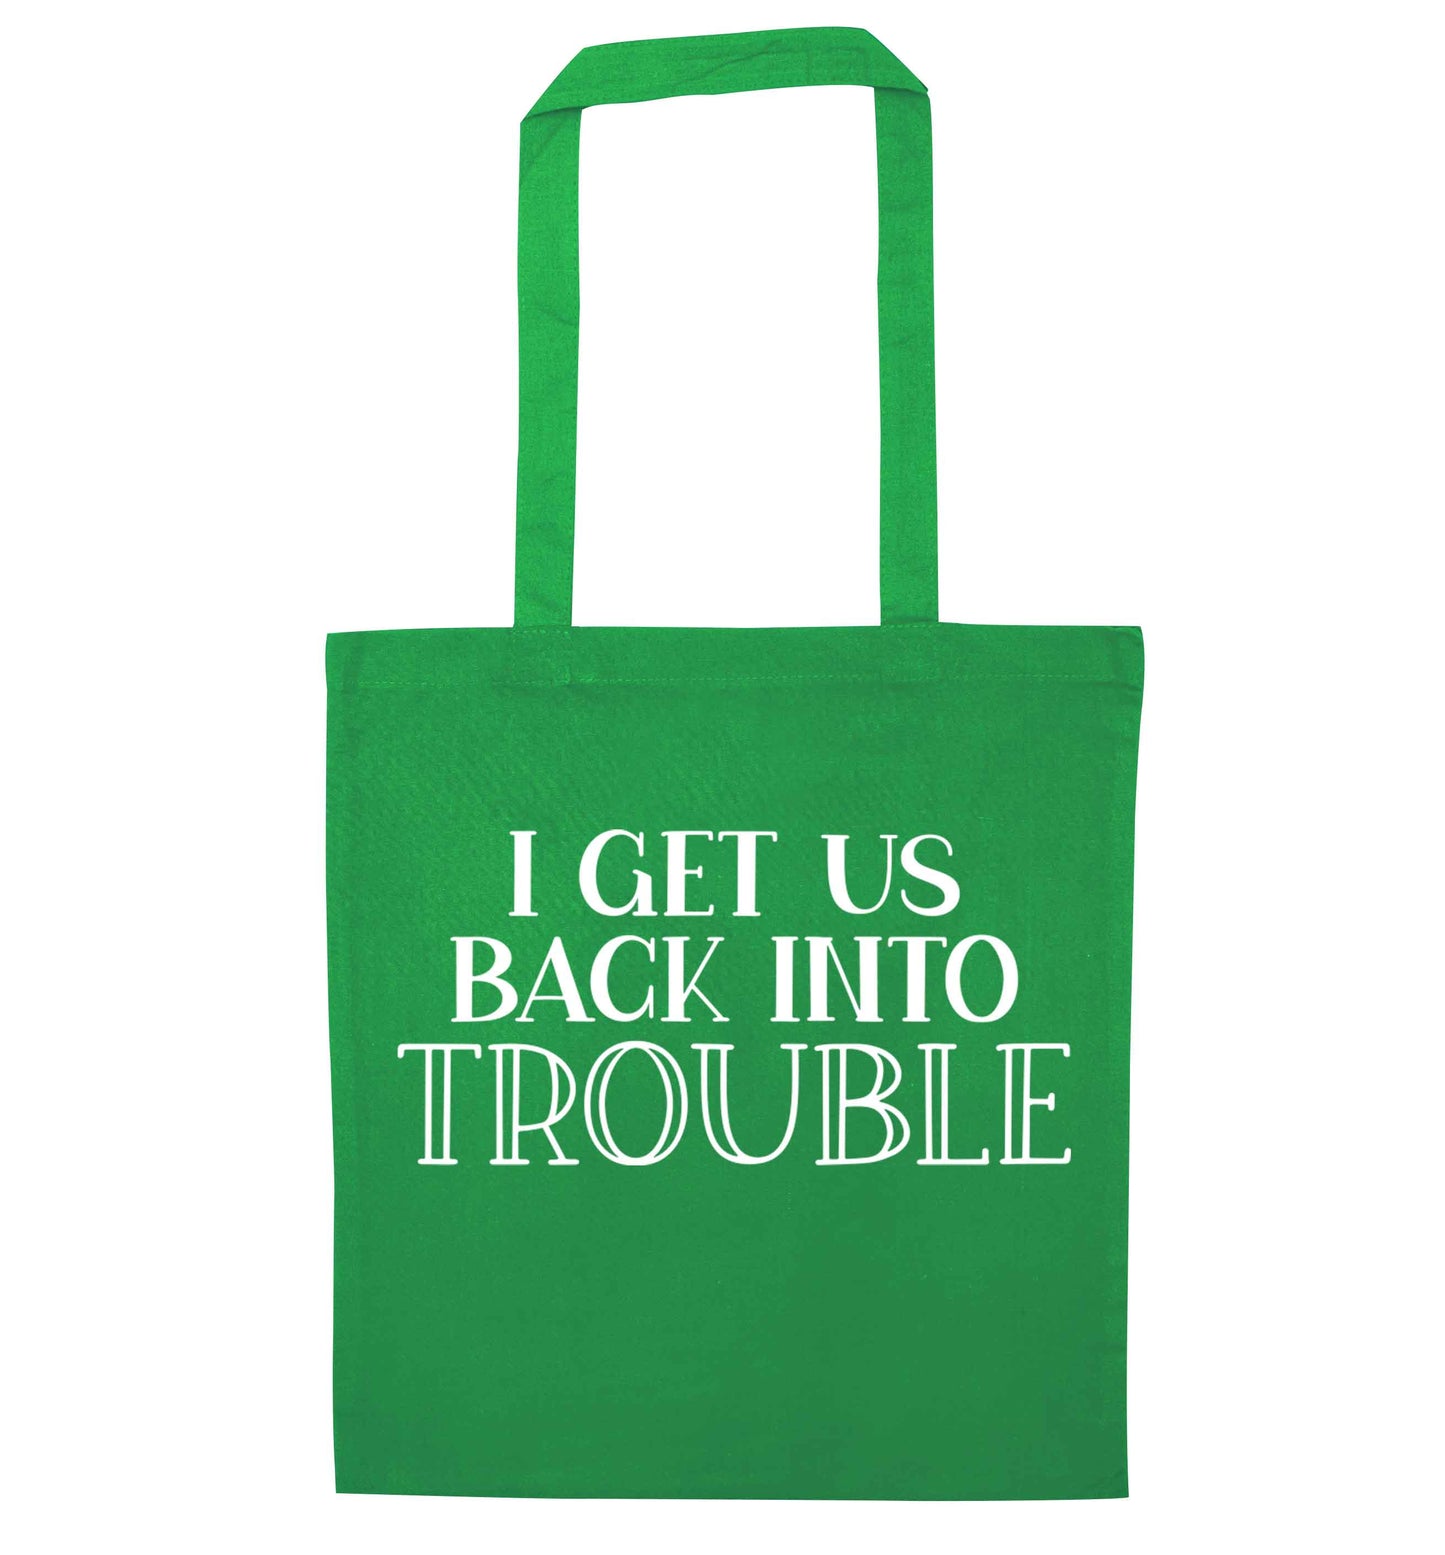 I get us back into trouble green tote bag